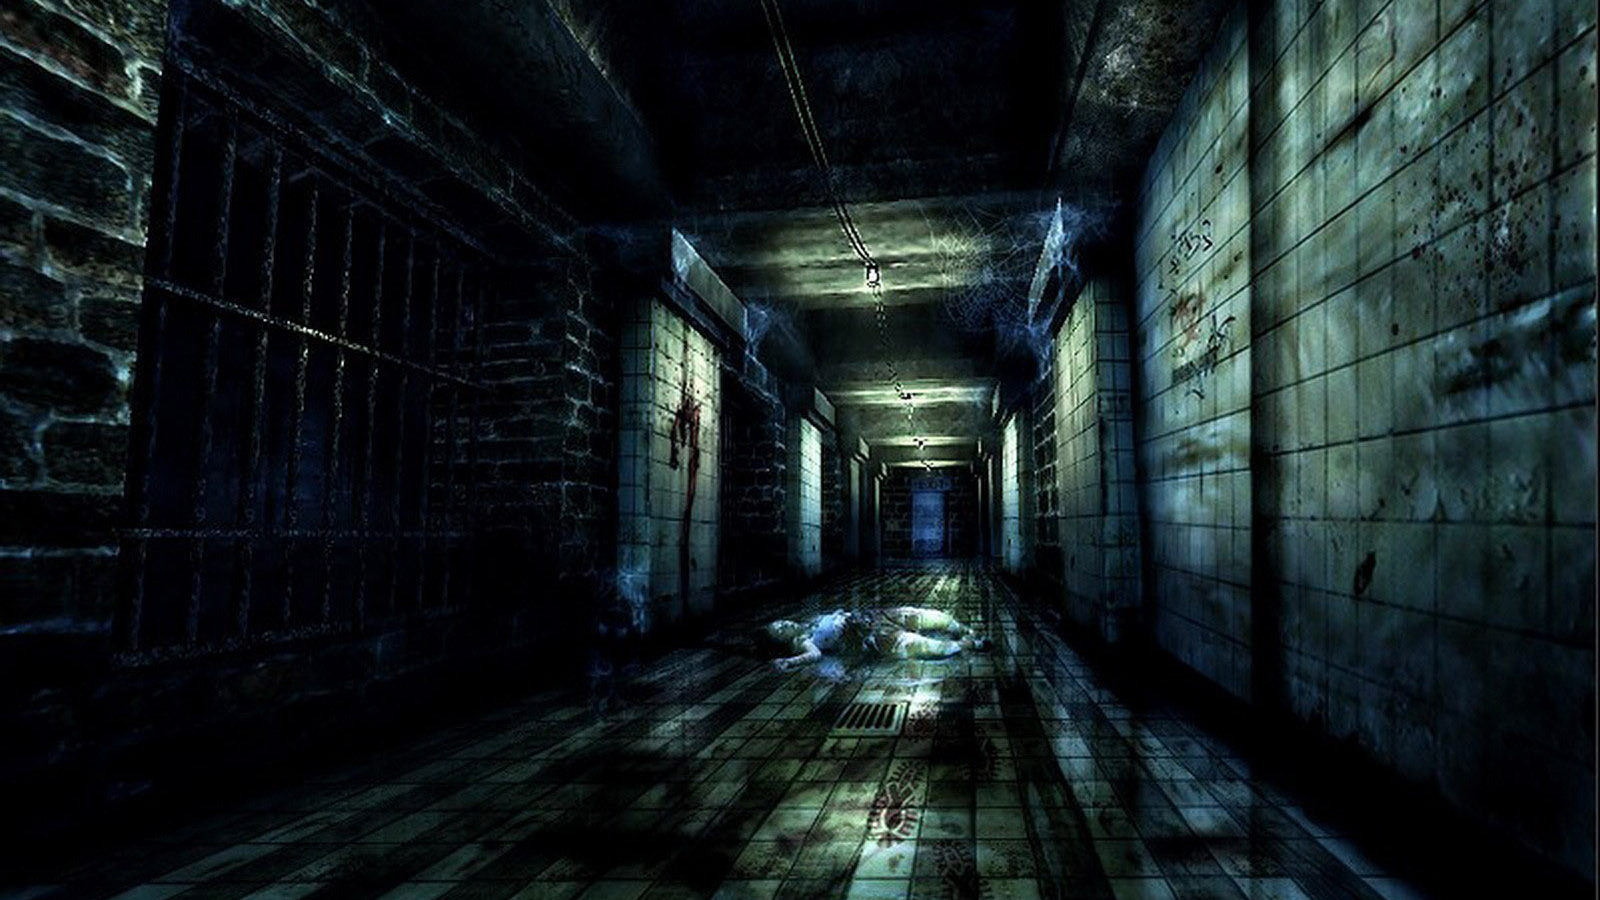 Free download scary the maze [1600x1200] for your Desktop, Mobile & Tablet. Explore Movie Room Wallpaper. Movie Theme Wallpaper, Movie Film Wallpaper Border, Movie Wallpaper Border